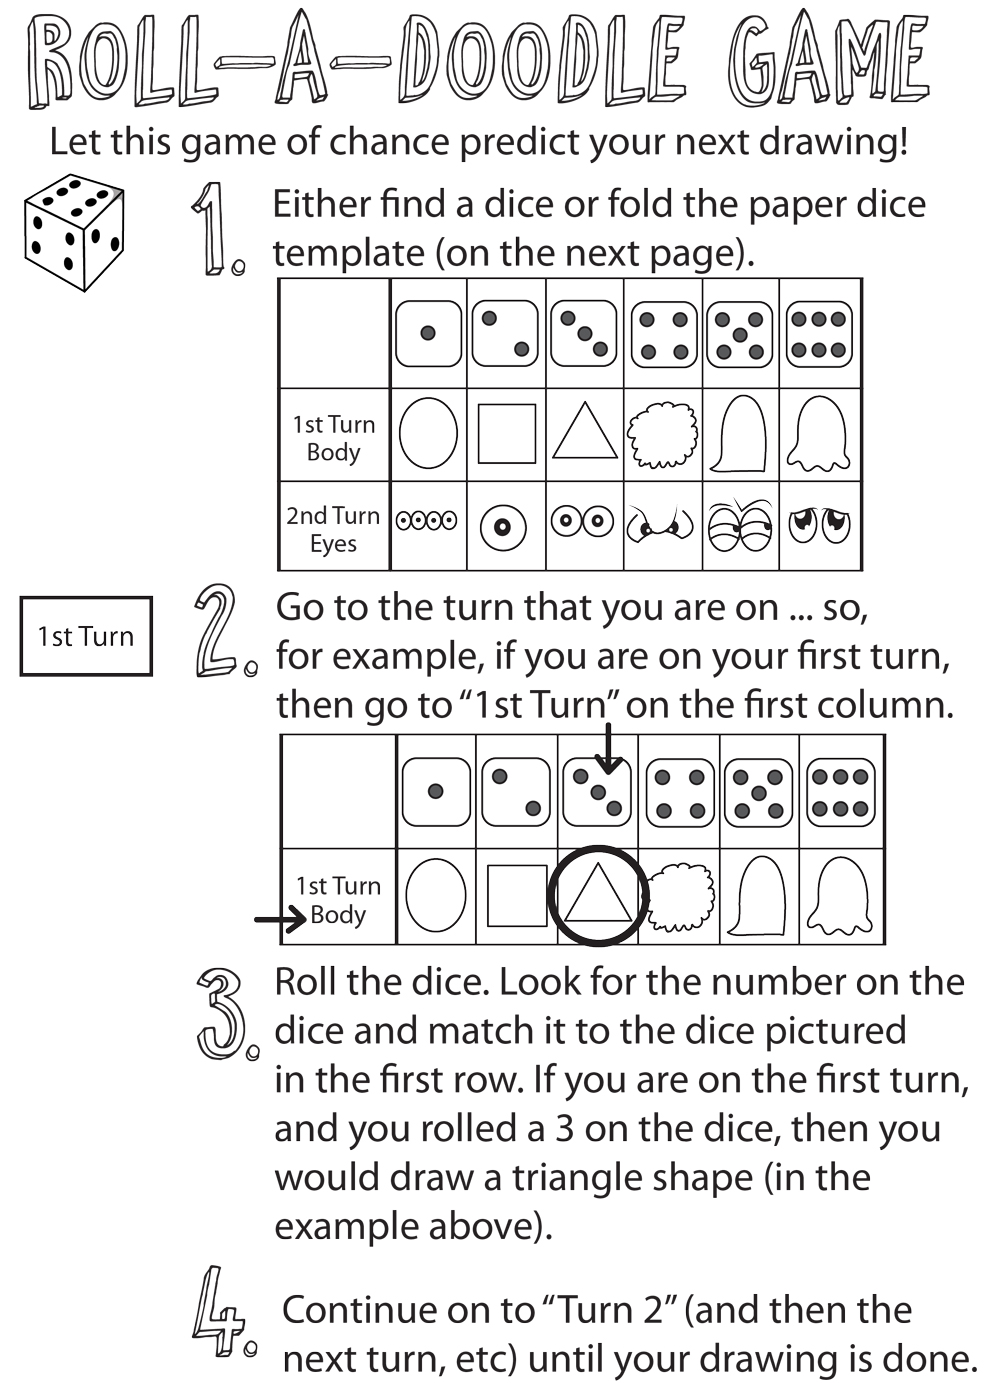 drawing-games-for-kids-roll-the-dice-drawing-game-how-to-draw-step-by-step-drawing-tutorials